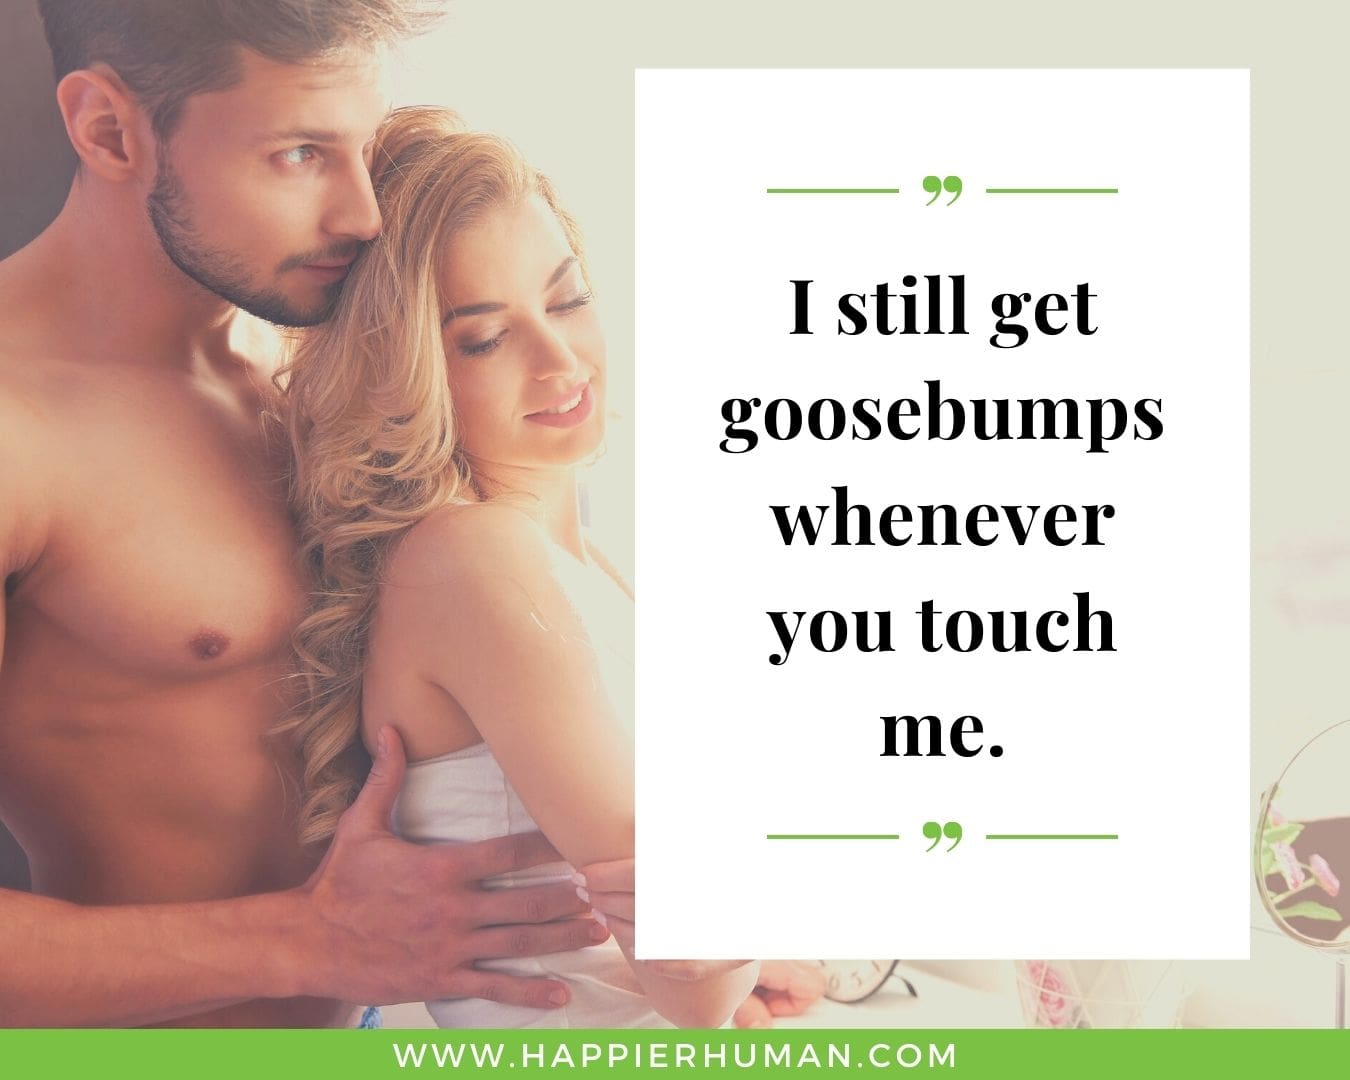 Short, Deep Love Quotes for Her - “I still get goosebumps whenever you touch me.”